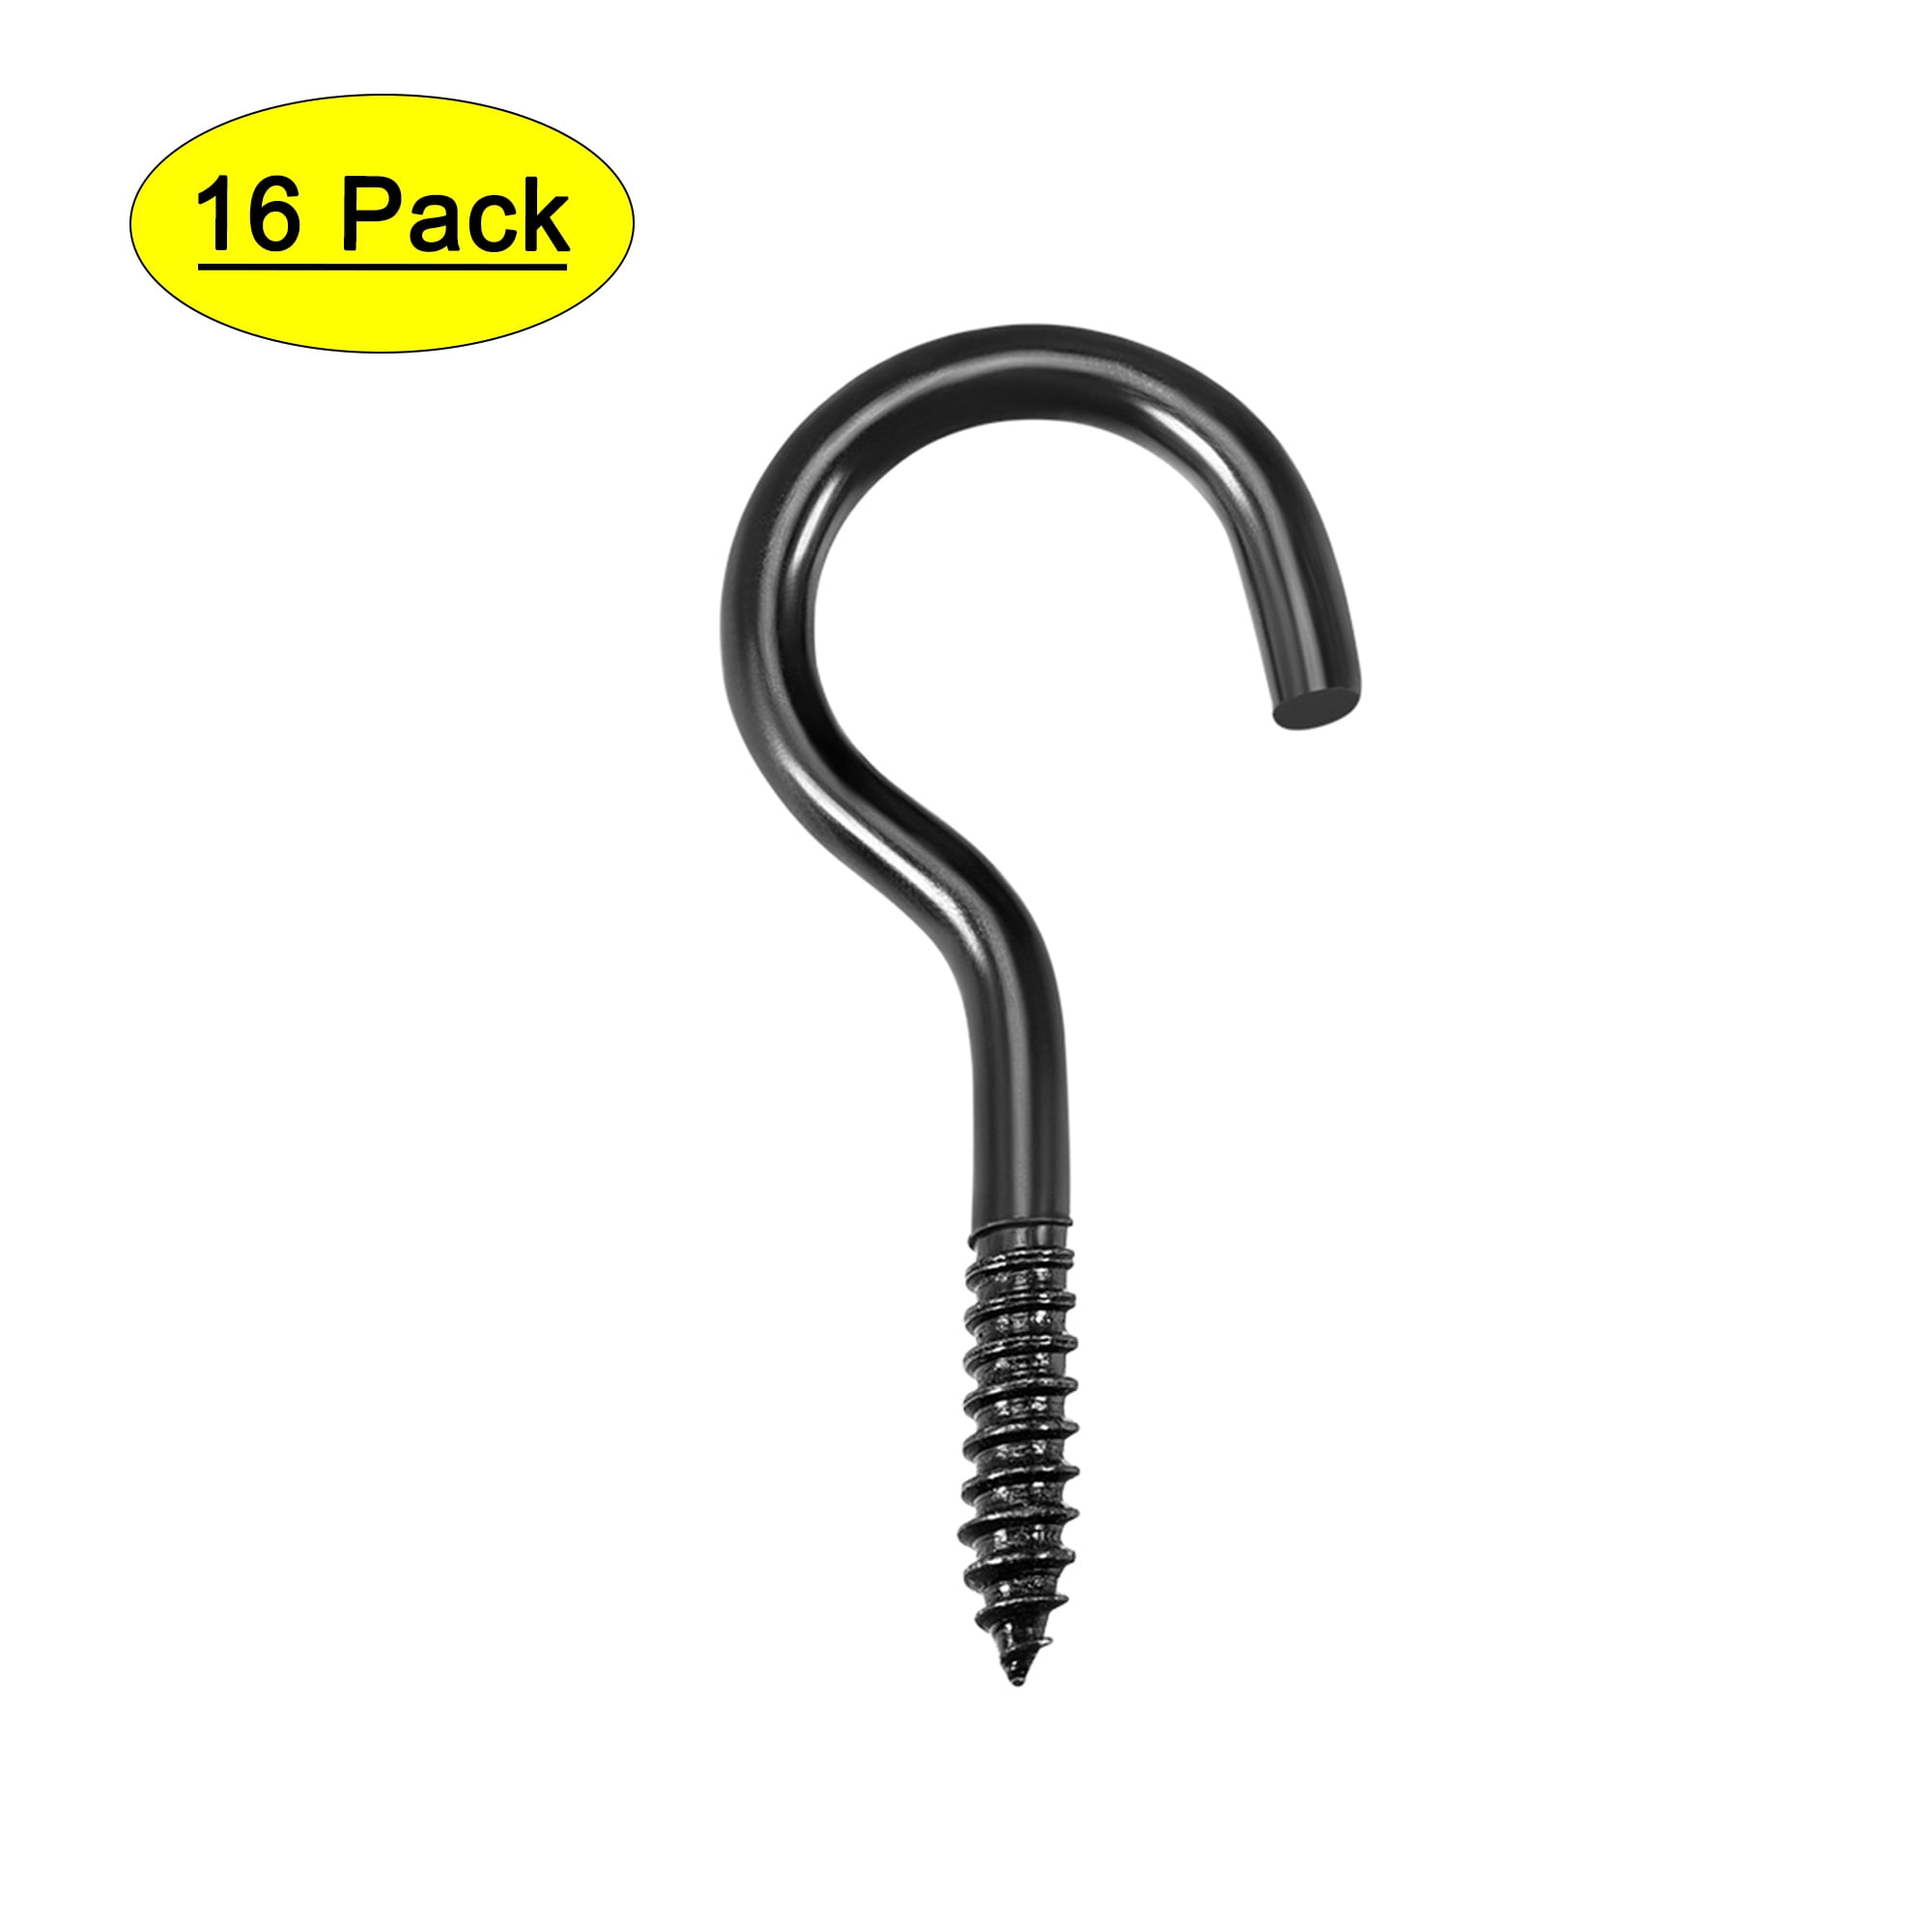 5mm Dia Round Eye Bolt Hooks Size - 35mm Thread M8 Self-Tapping Ceiling Cup 10 Set Metal Screws Eyes Bolt Hooks and Plastic Drill Anchors Hole 